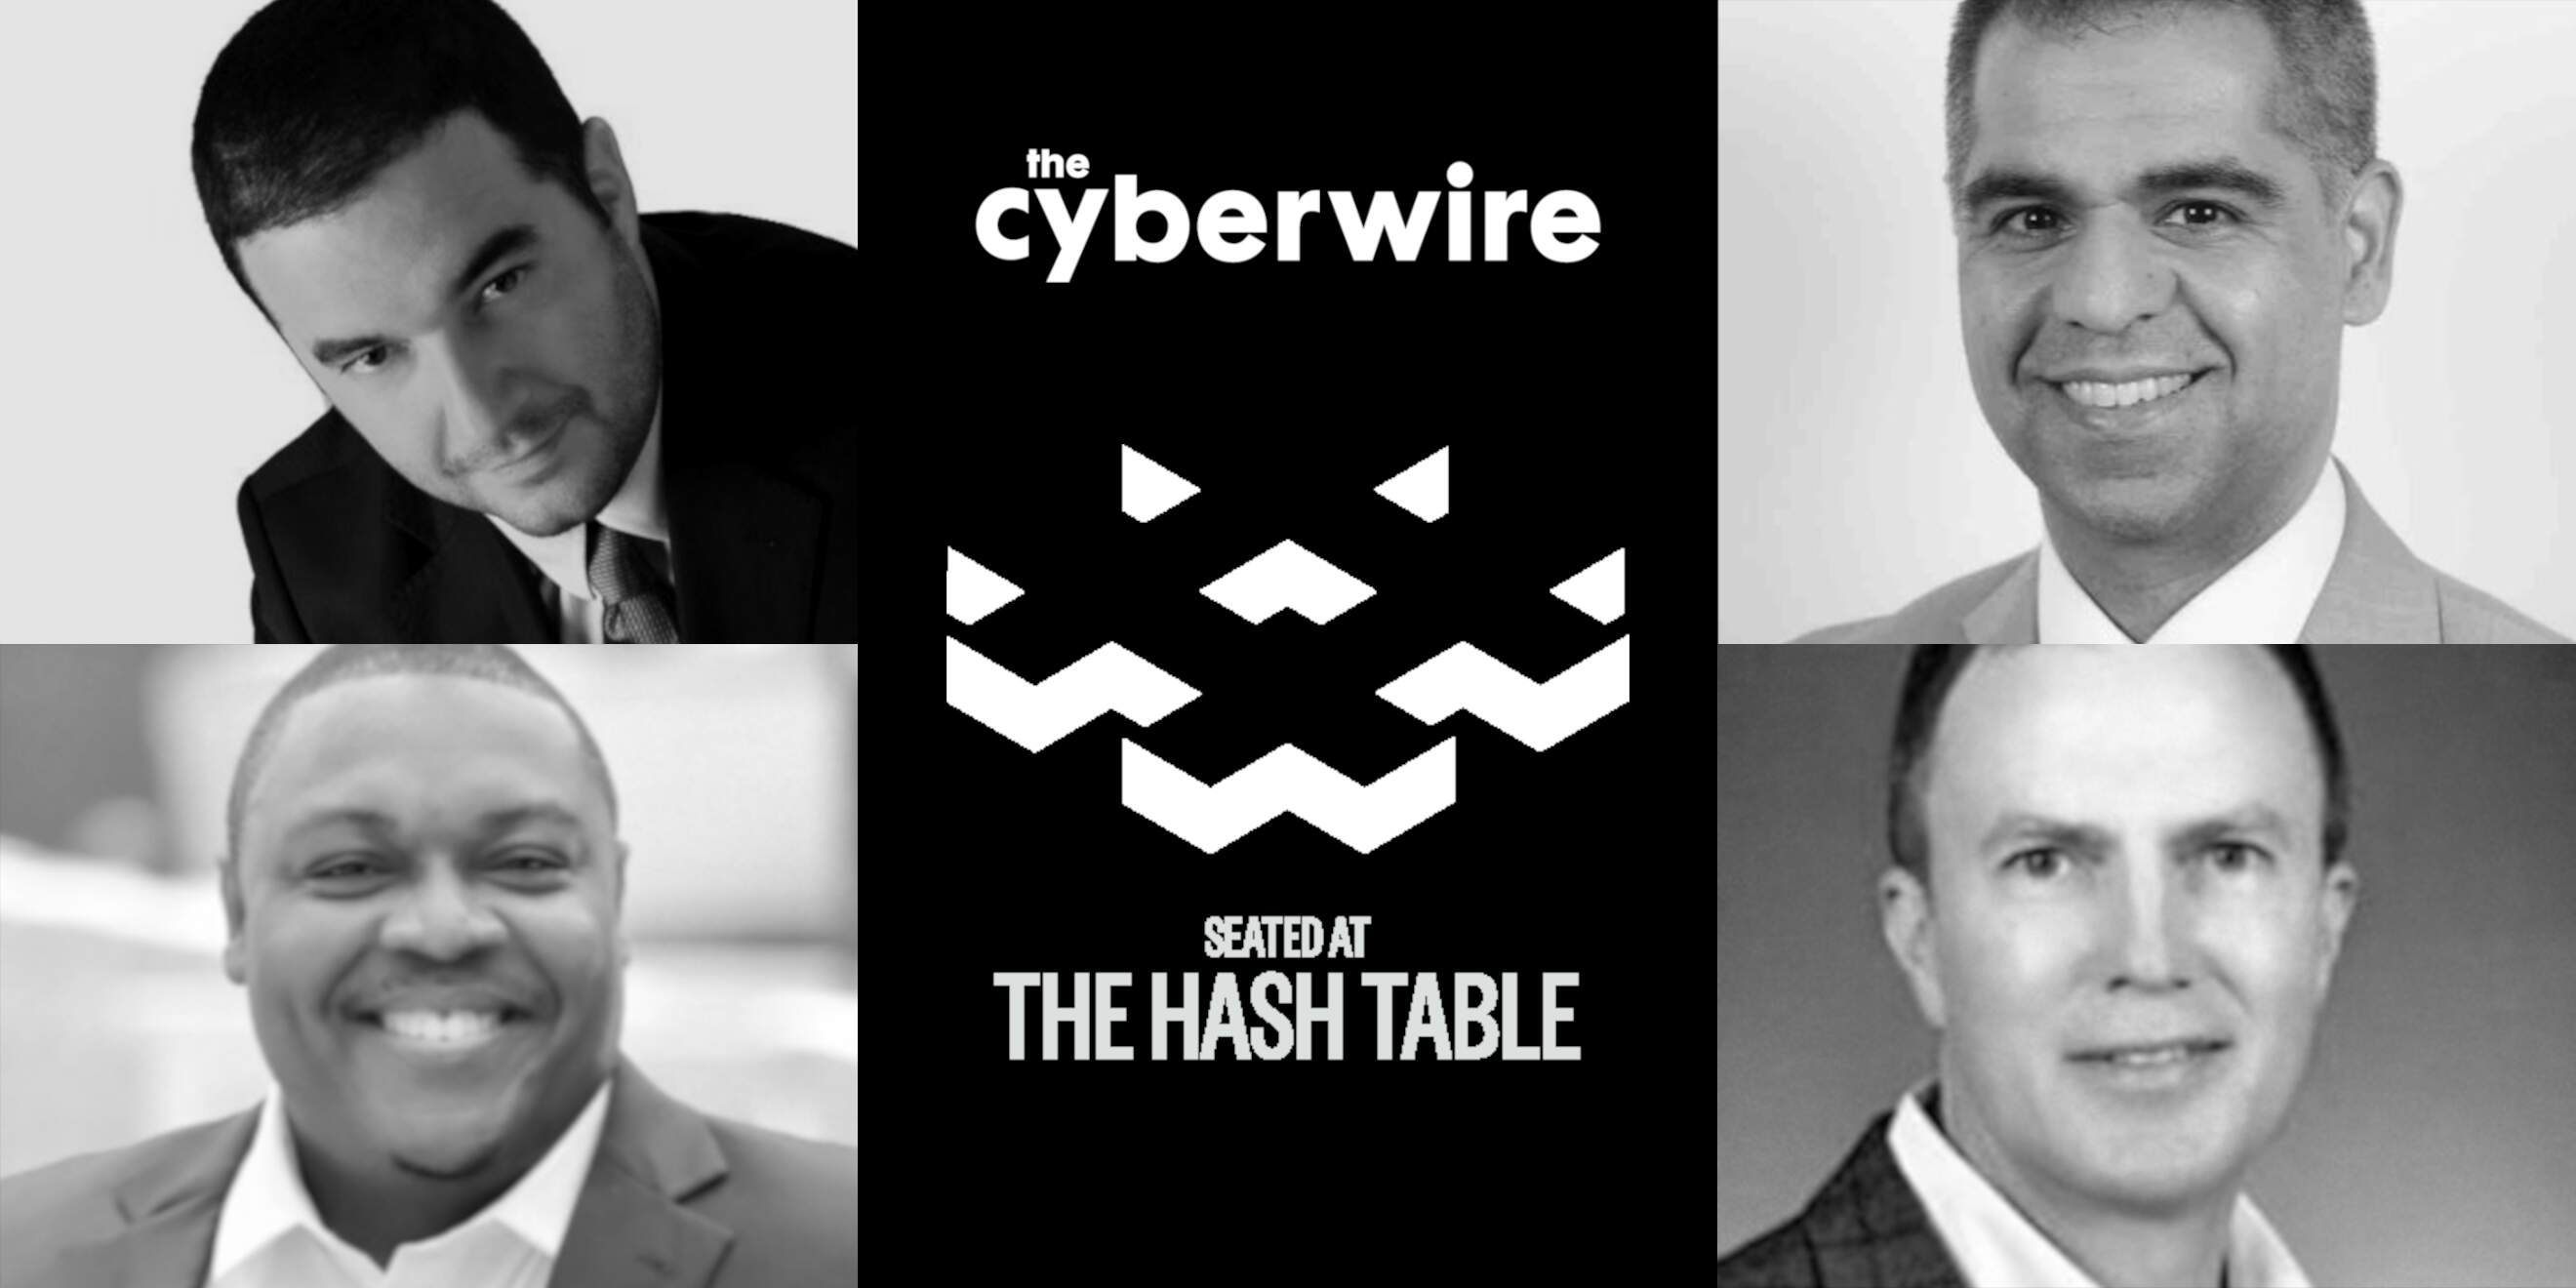 The CyberWire appoints four new distinguished leaders to its panel of cybersecurity experts.